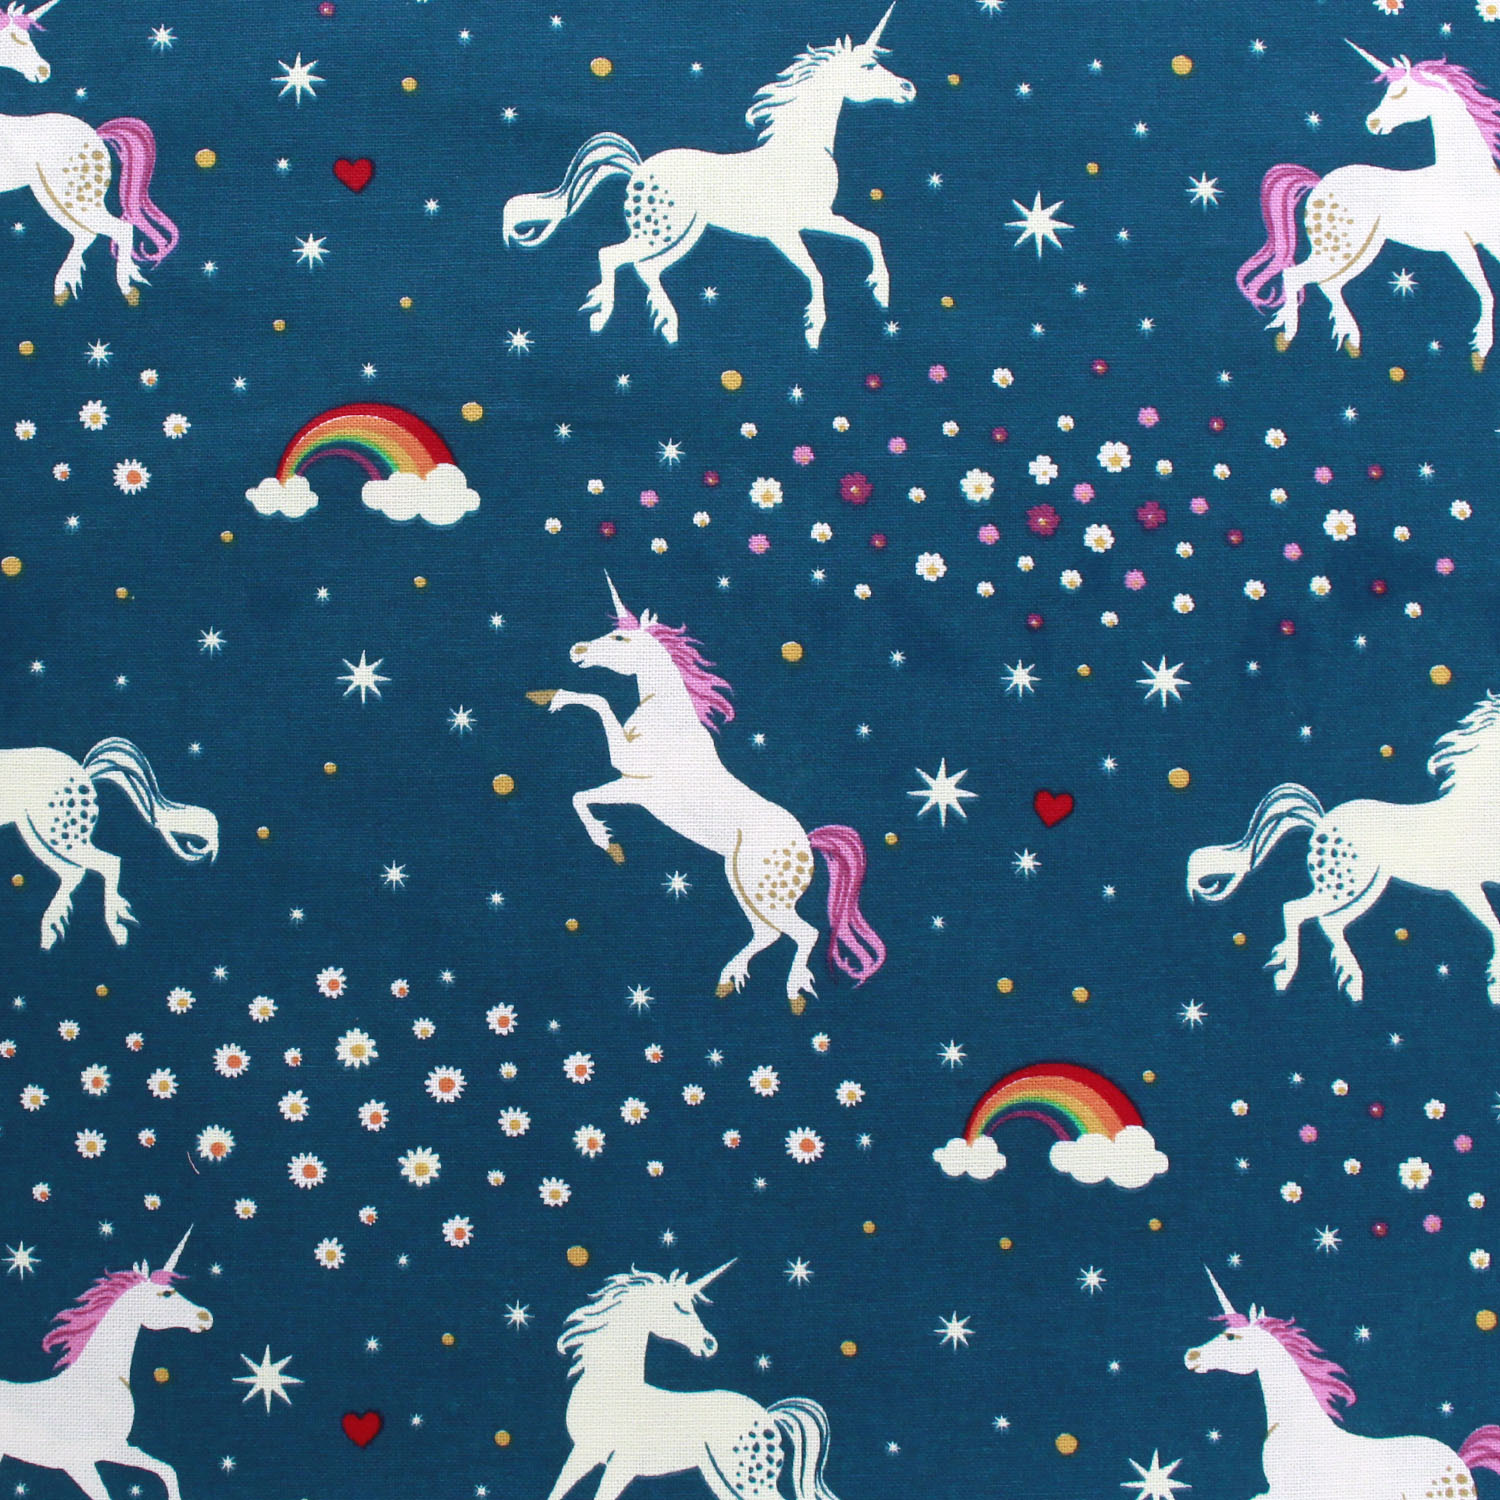 BB1012-655-50CM ユニコーン Oxprint fabric""", imported from Netherland""", Width approx.140cm""", 50cm/unit (sheet)